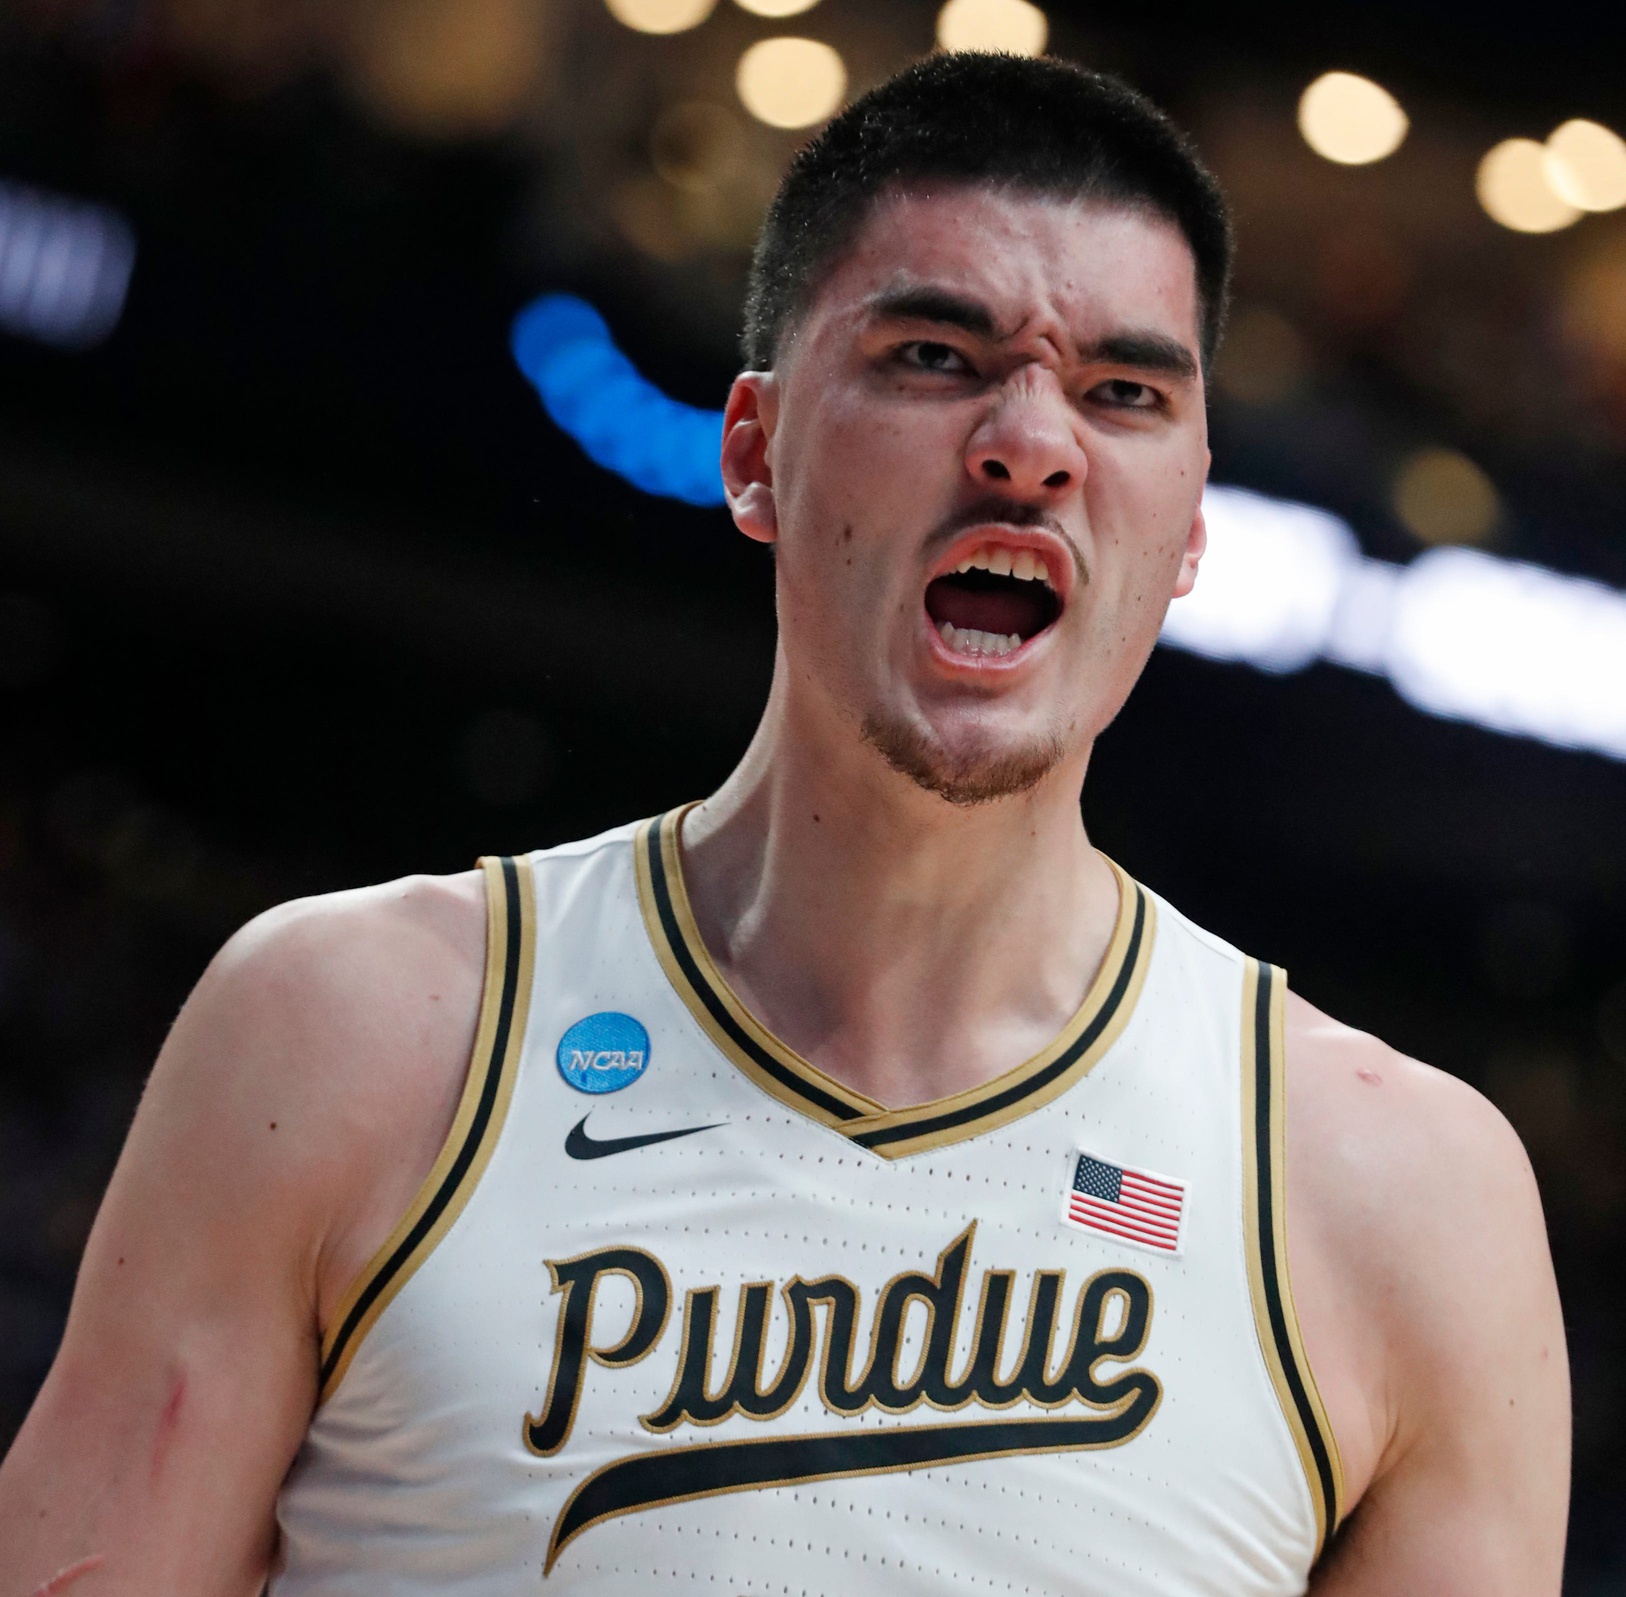 Purdue Boilermakers center Zach Edey (15) reacts after scoring during the NCAA MenÕs Basketball Tournament game against the Fairleigh Dickinson Knights, Friday, March 17, 2023, at Nationwide Arena in Columbus, Ohio. Fairleigh Dickinson Knights won 63-58.